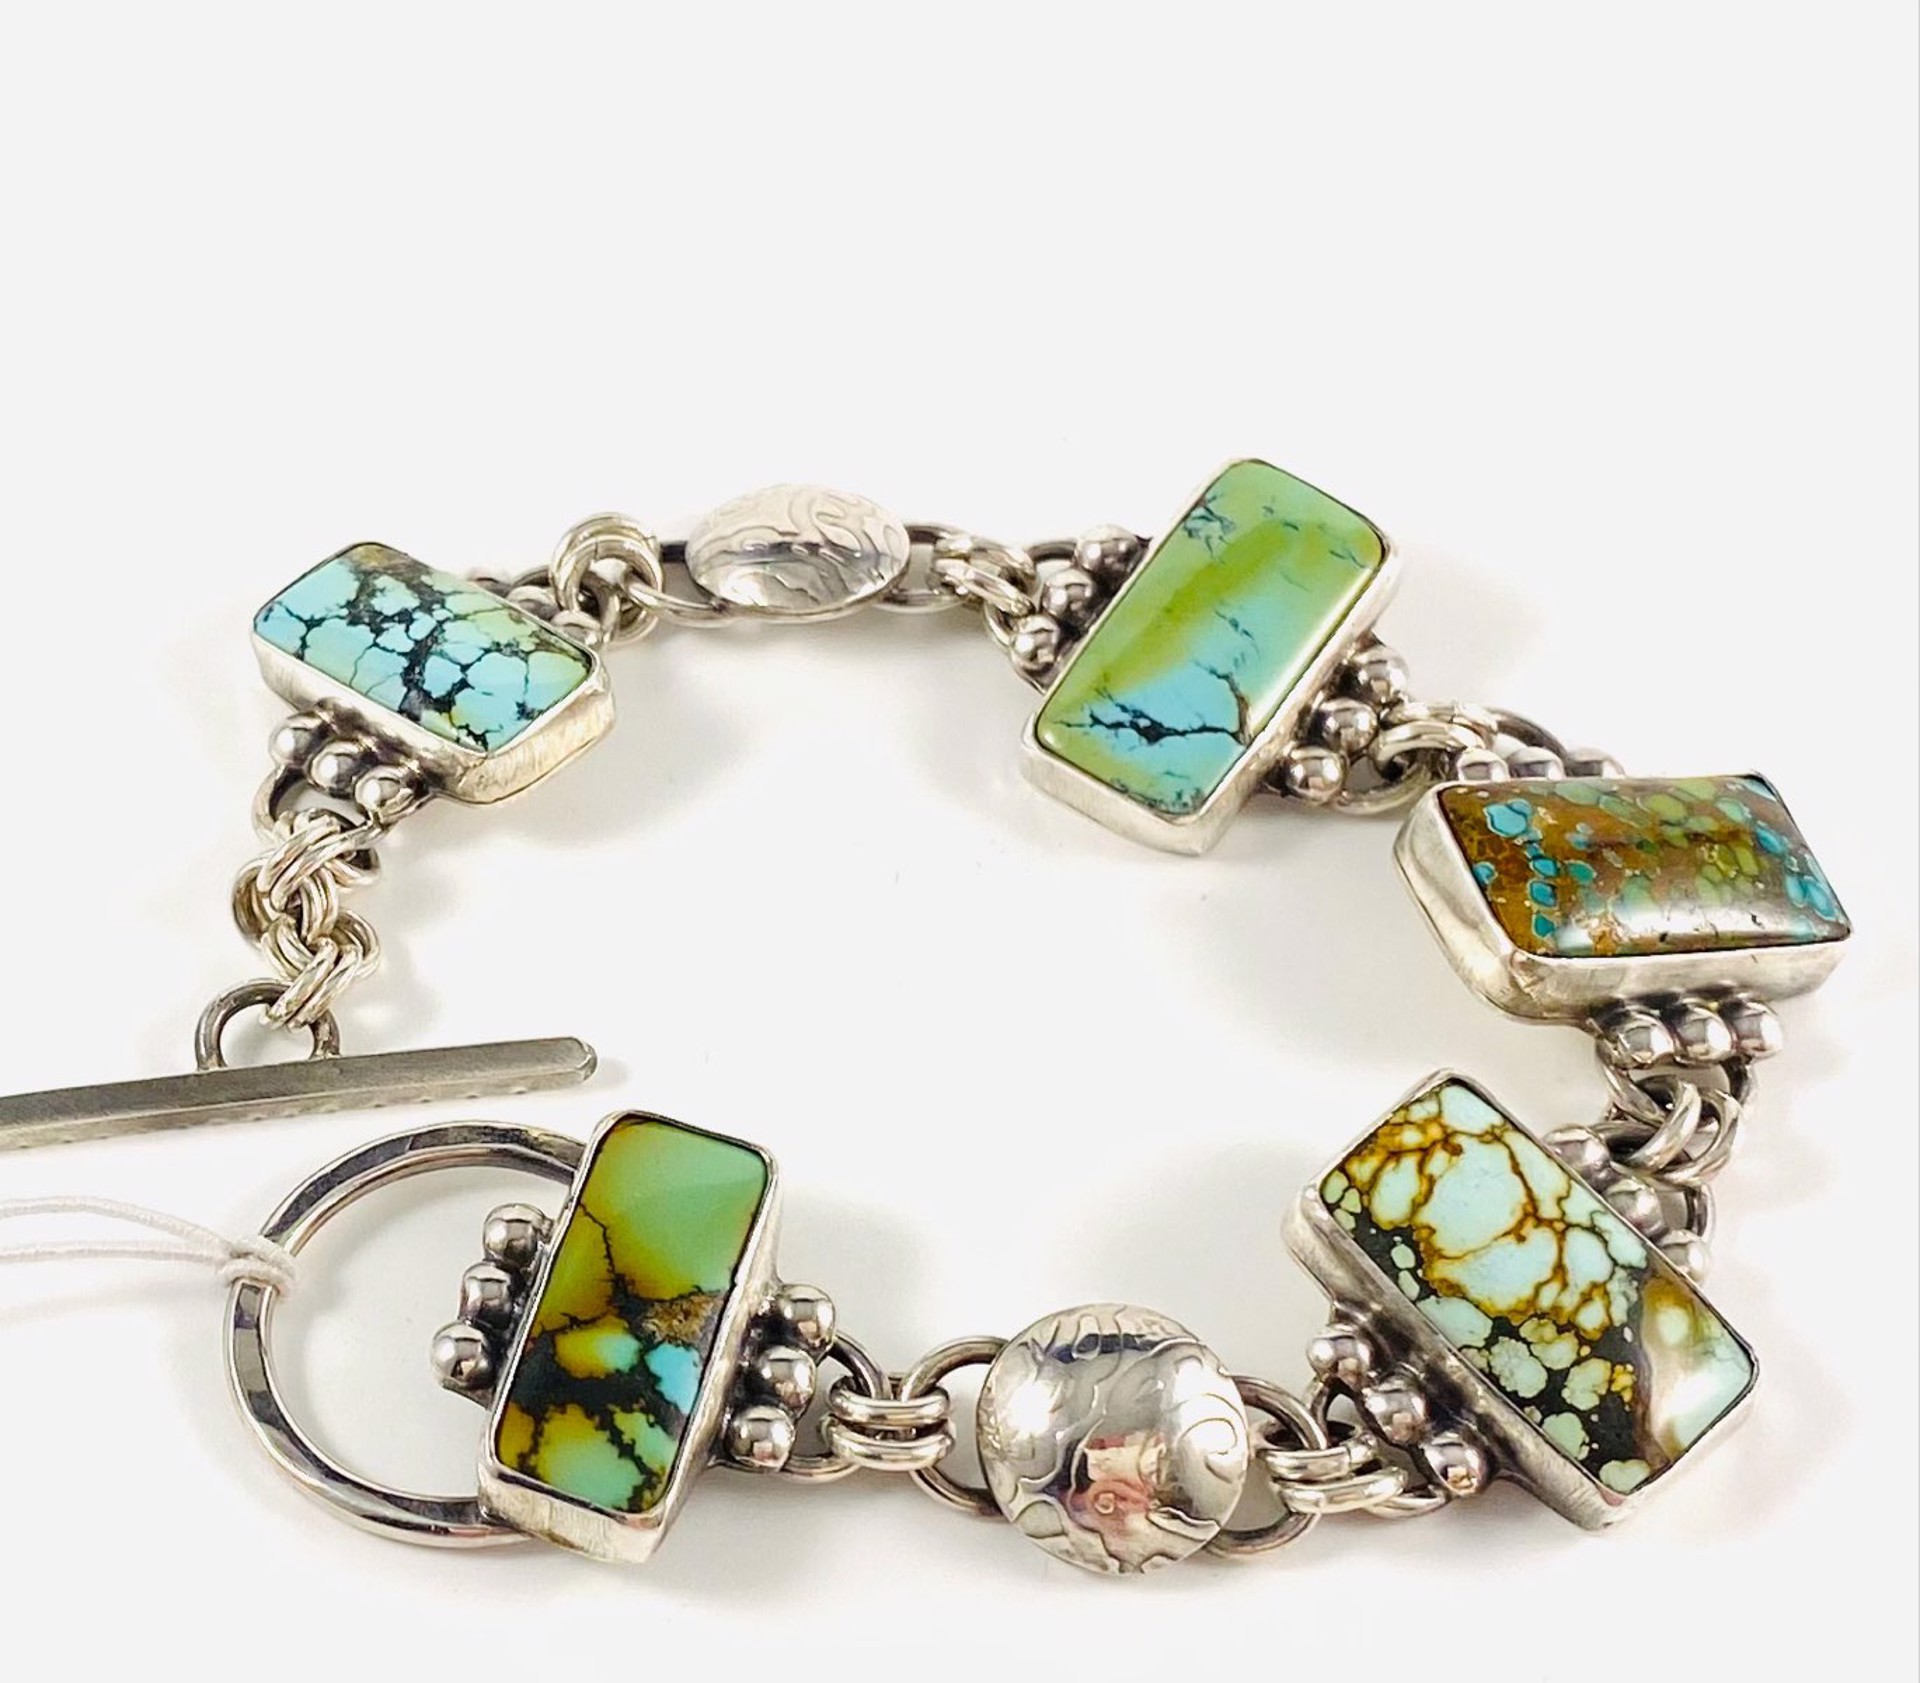 AB22-80 FiveTreasure Mountain Turquoise Rectangles each set with six beads and Two Silver Dome spacers Link Bracelet by Anne Bivens